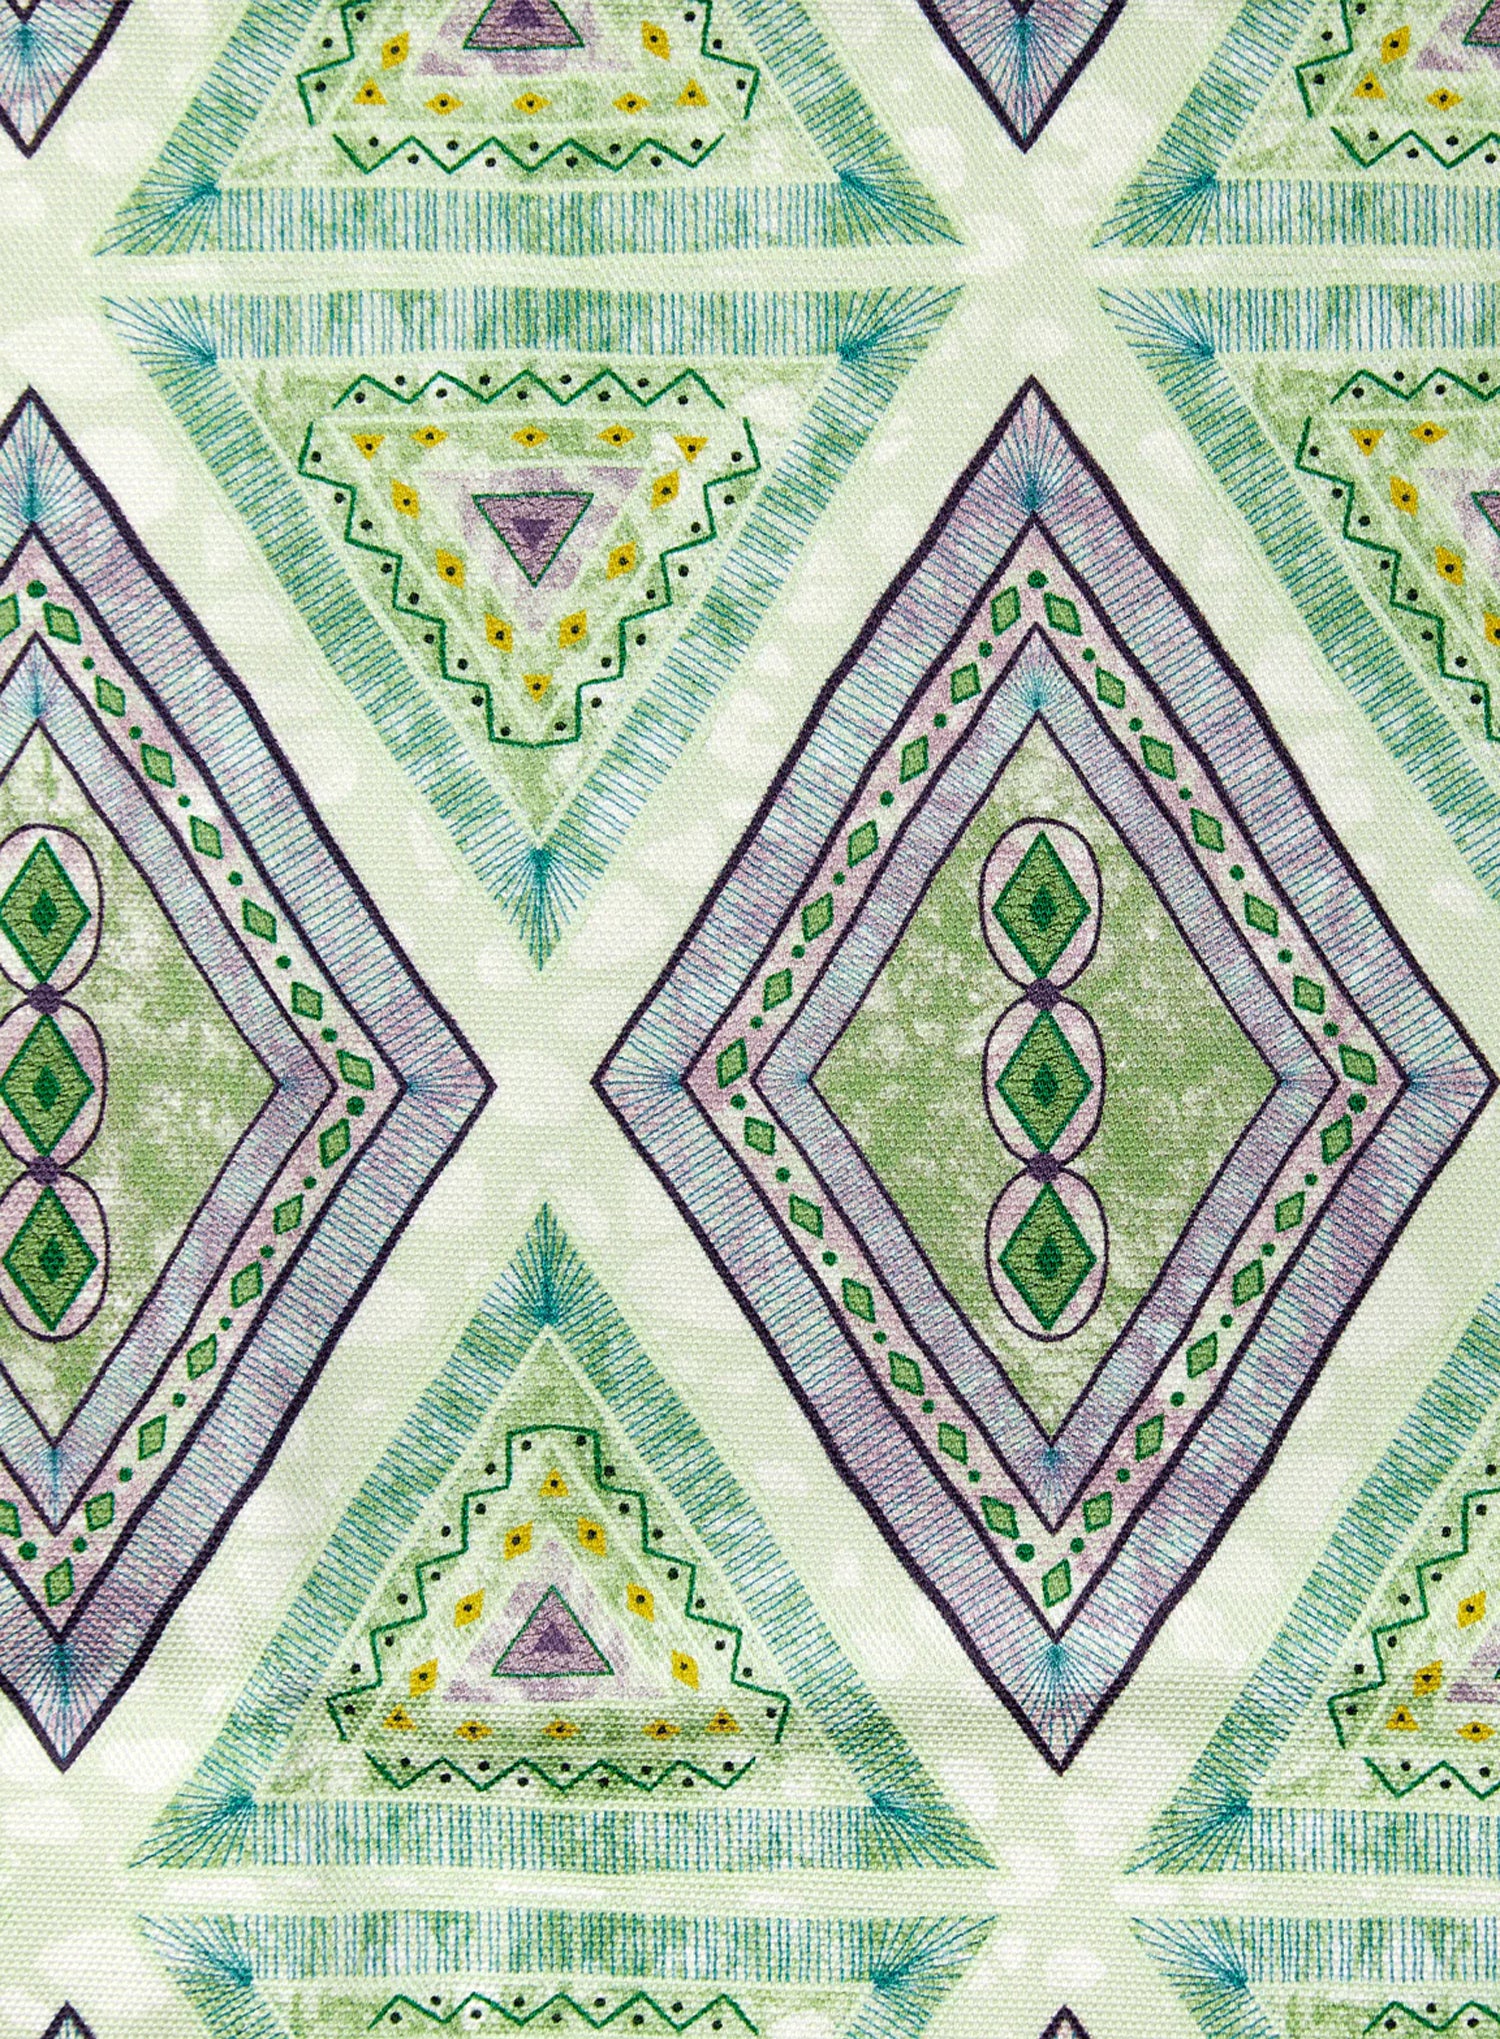 Detail of fabric in an intricate diamond grid pattern in shades of green and purple.